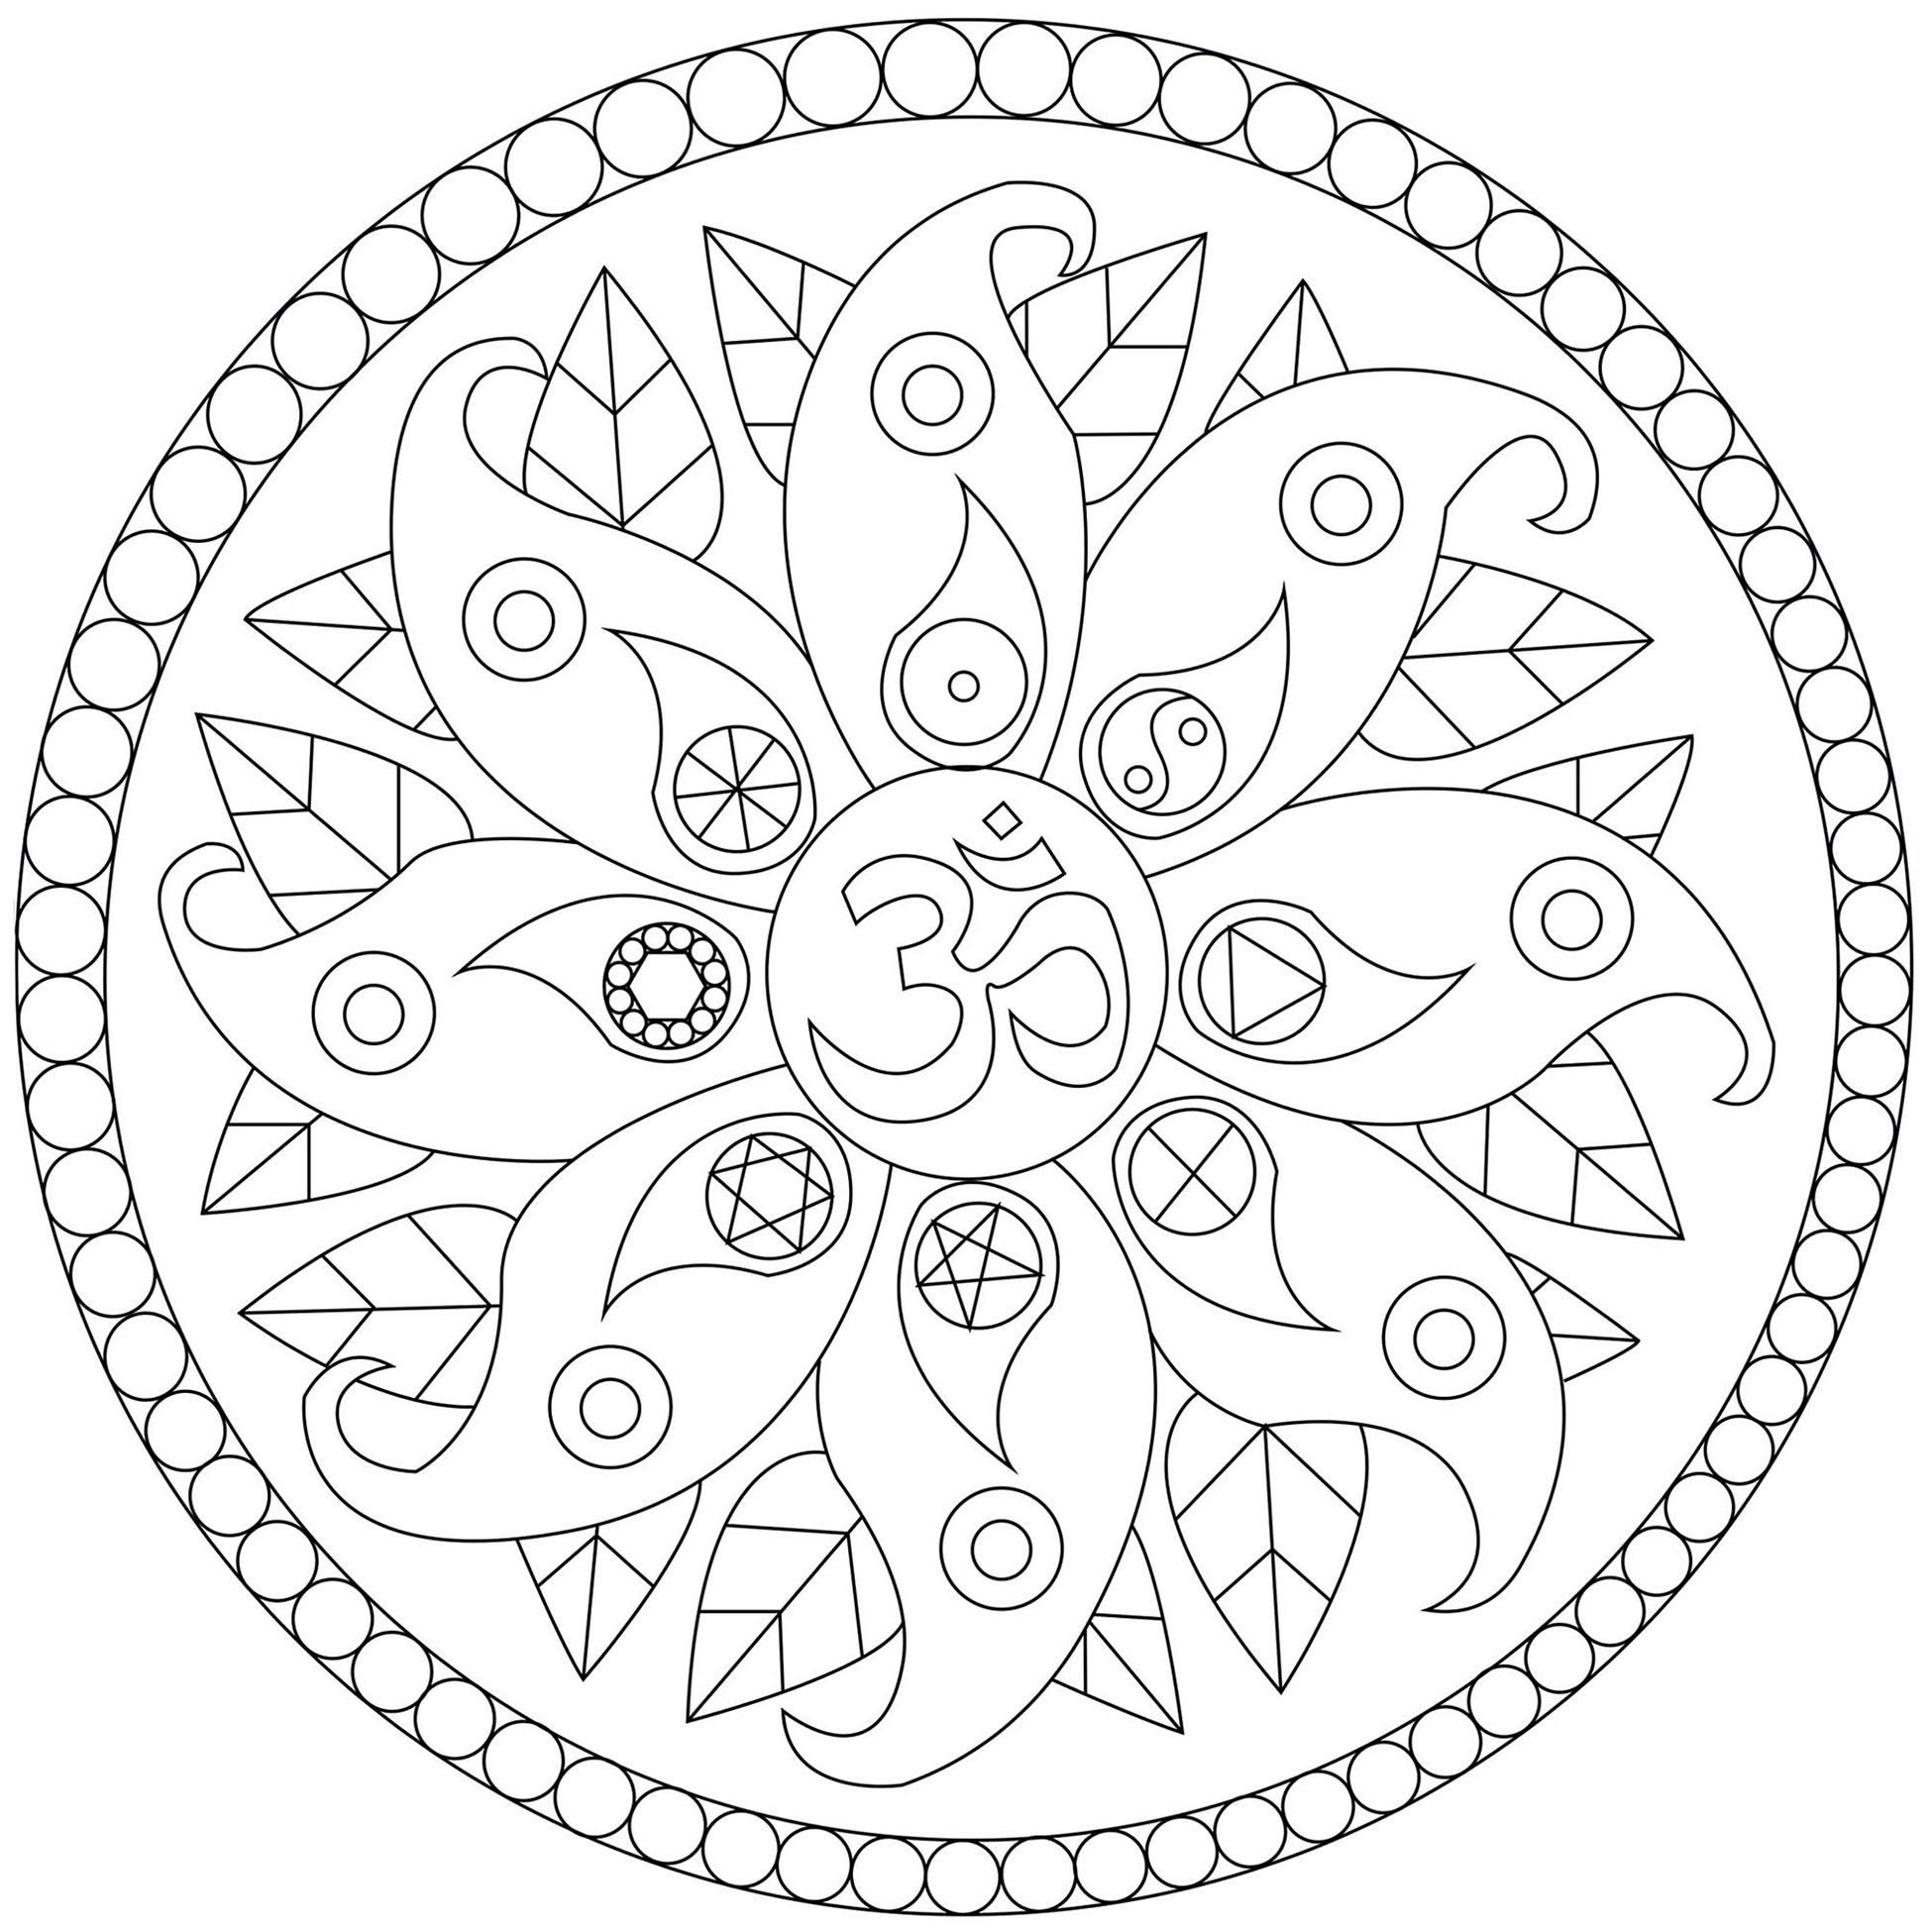 Simple Mandala with vegetal elements and various symbols : Om, Yin and Yang ... A coloring page very inspiring, Artist : Caillou